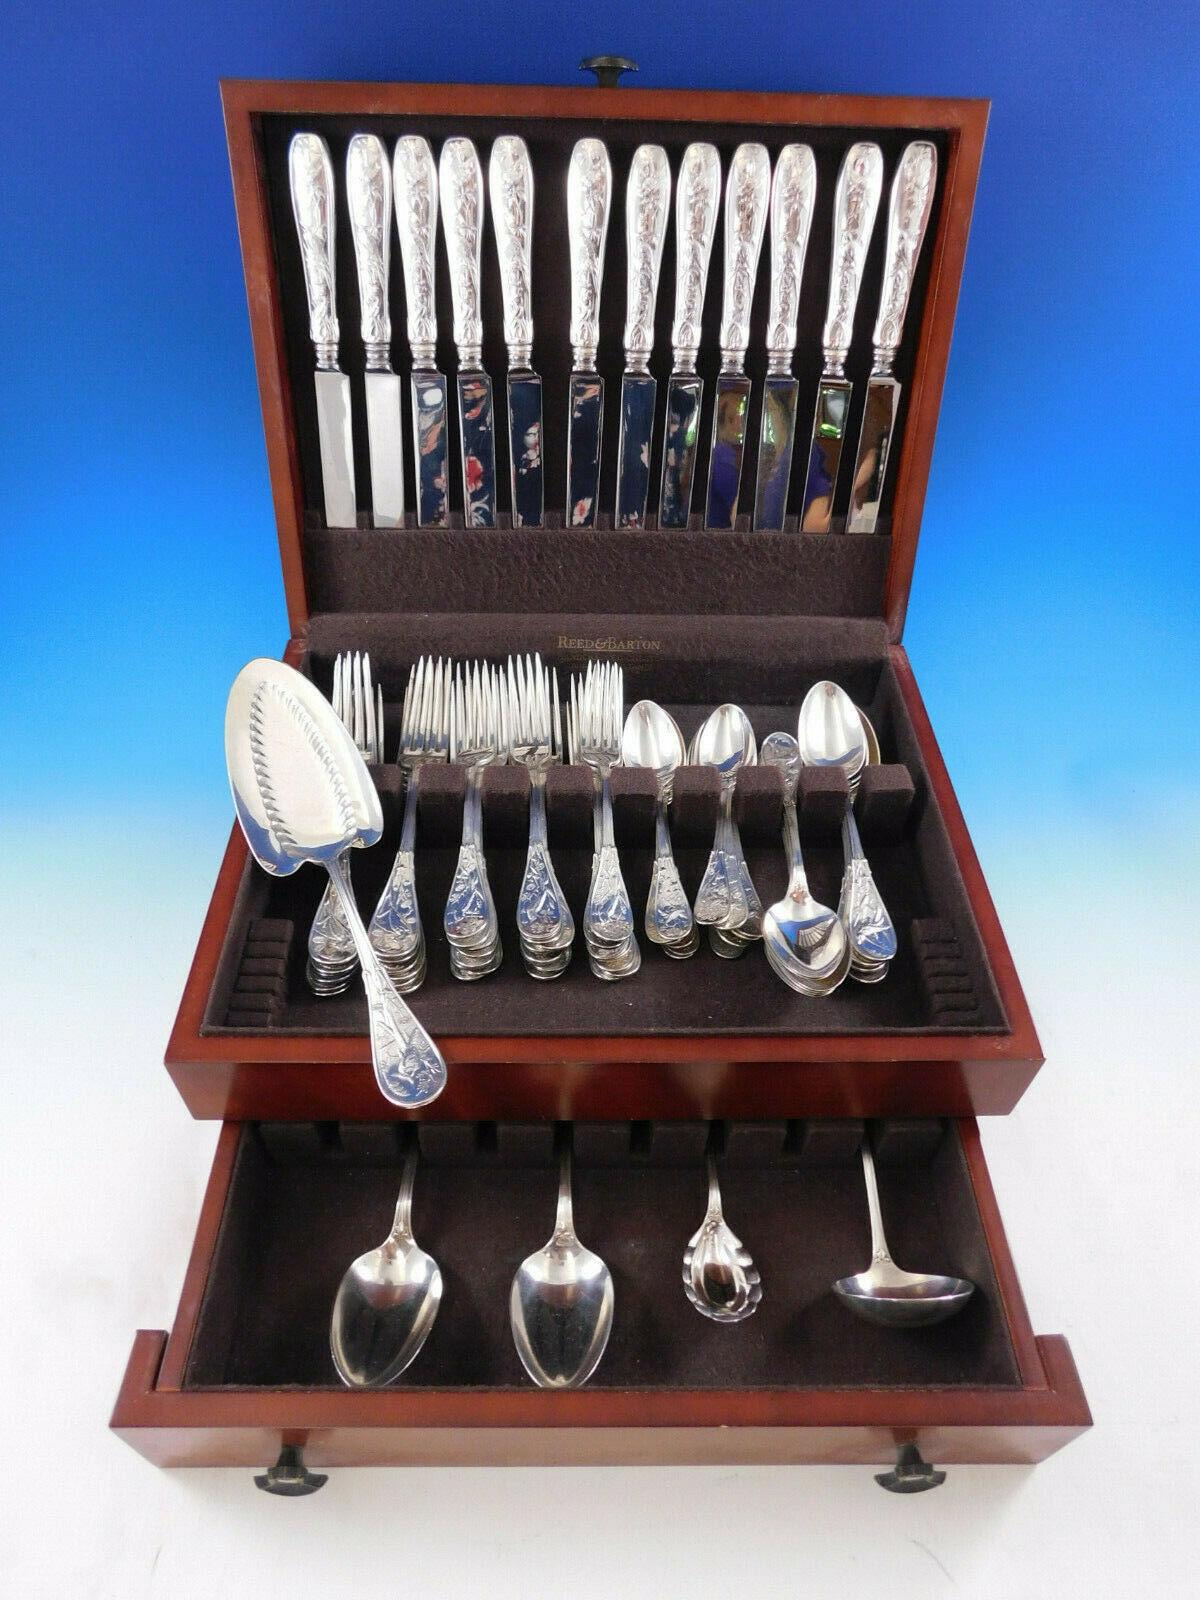 Exceptional Japanese by Tiffany & Co. sterling silver Dinner flatware set, 77 pieces. This set includes:

12 dinner size knives, 10 1/2